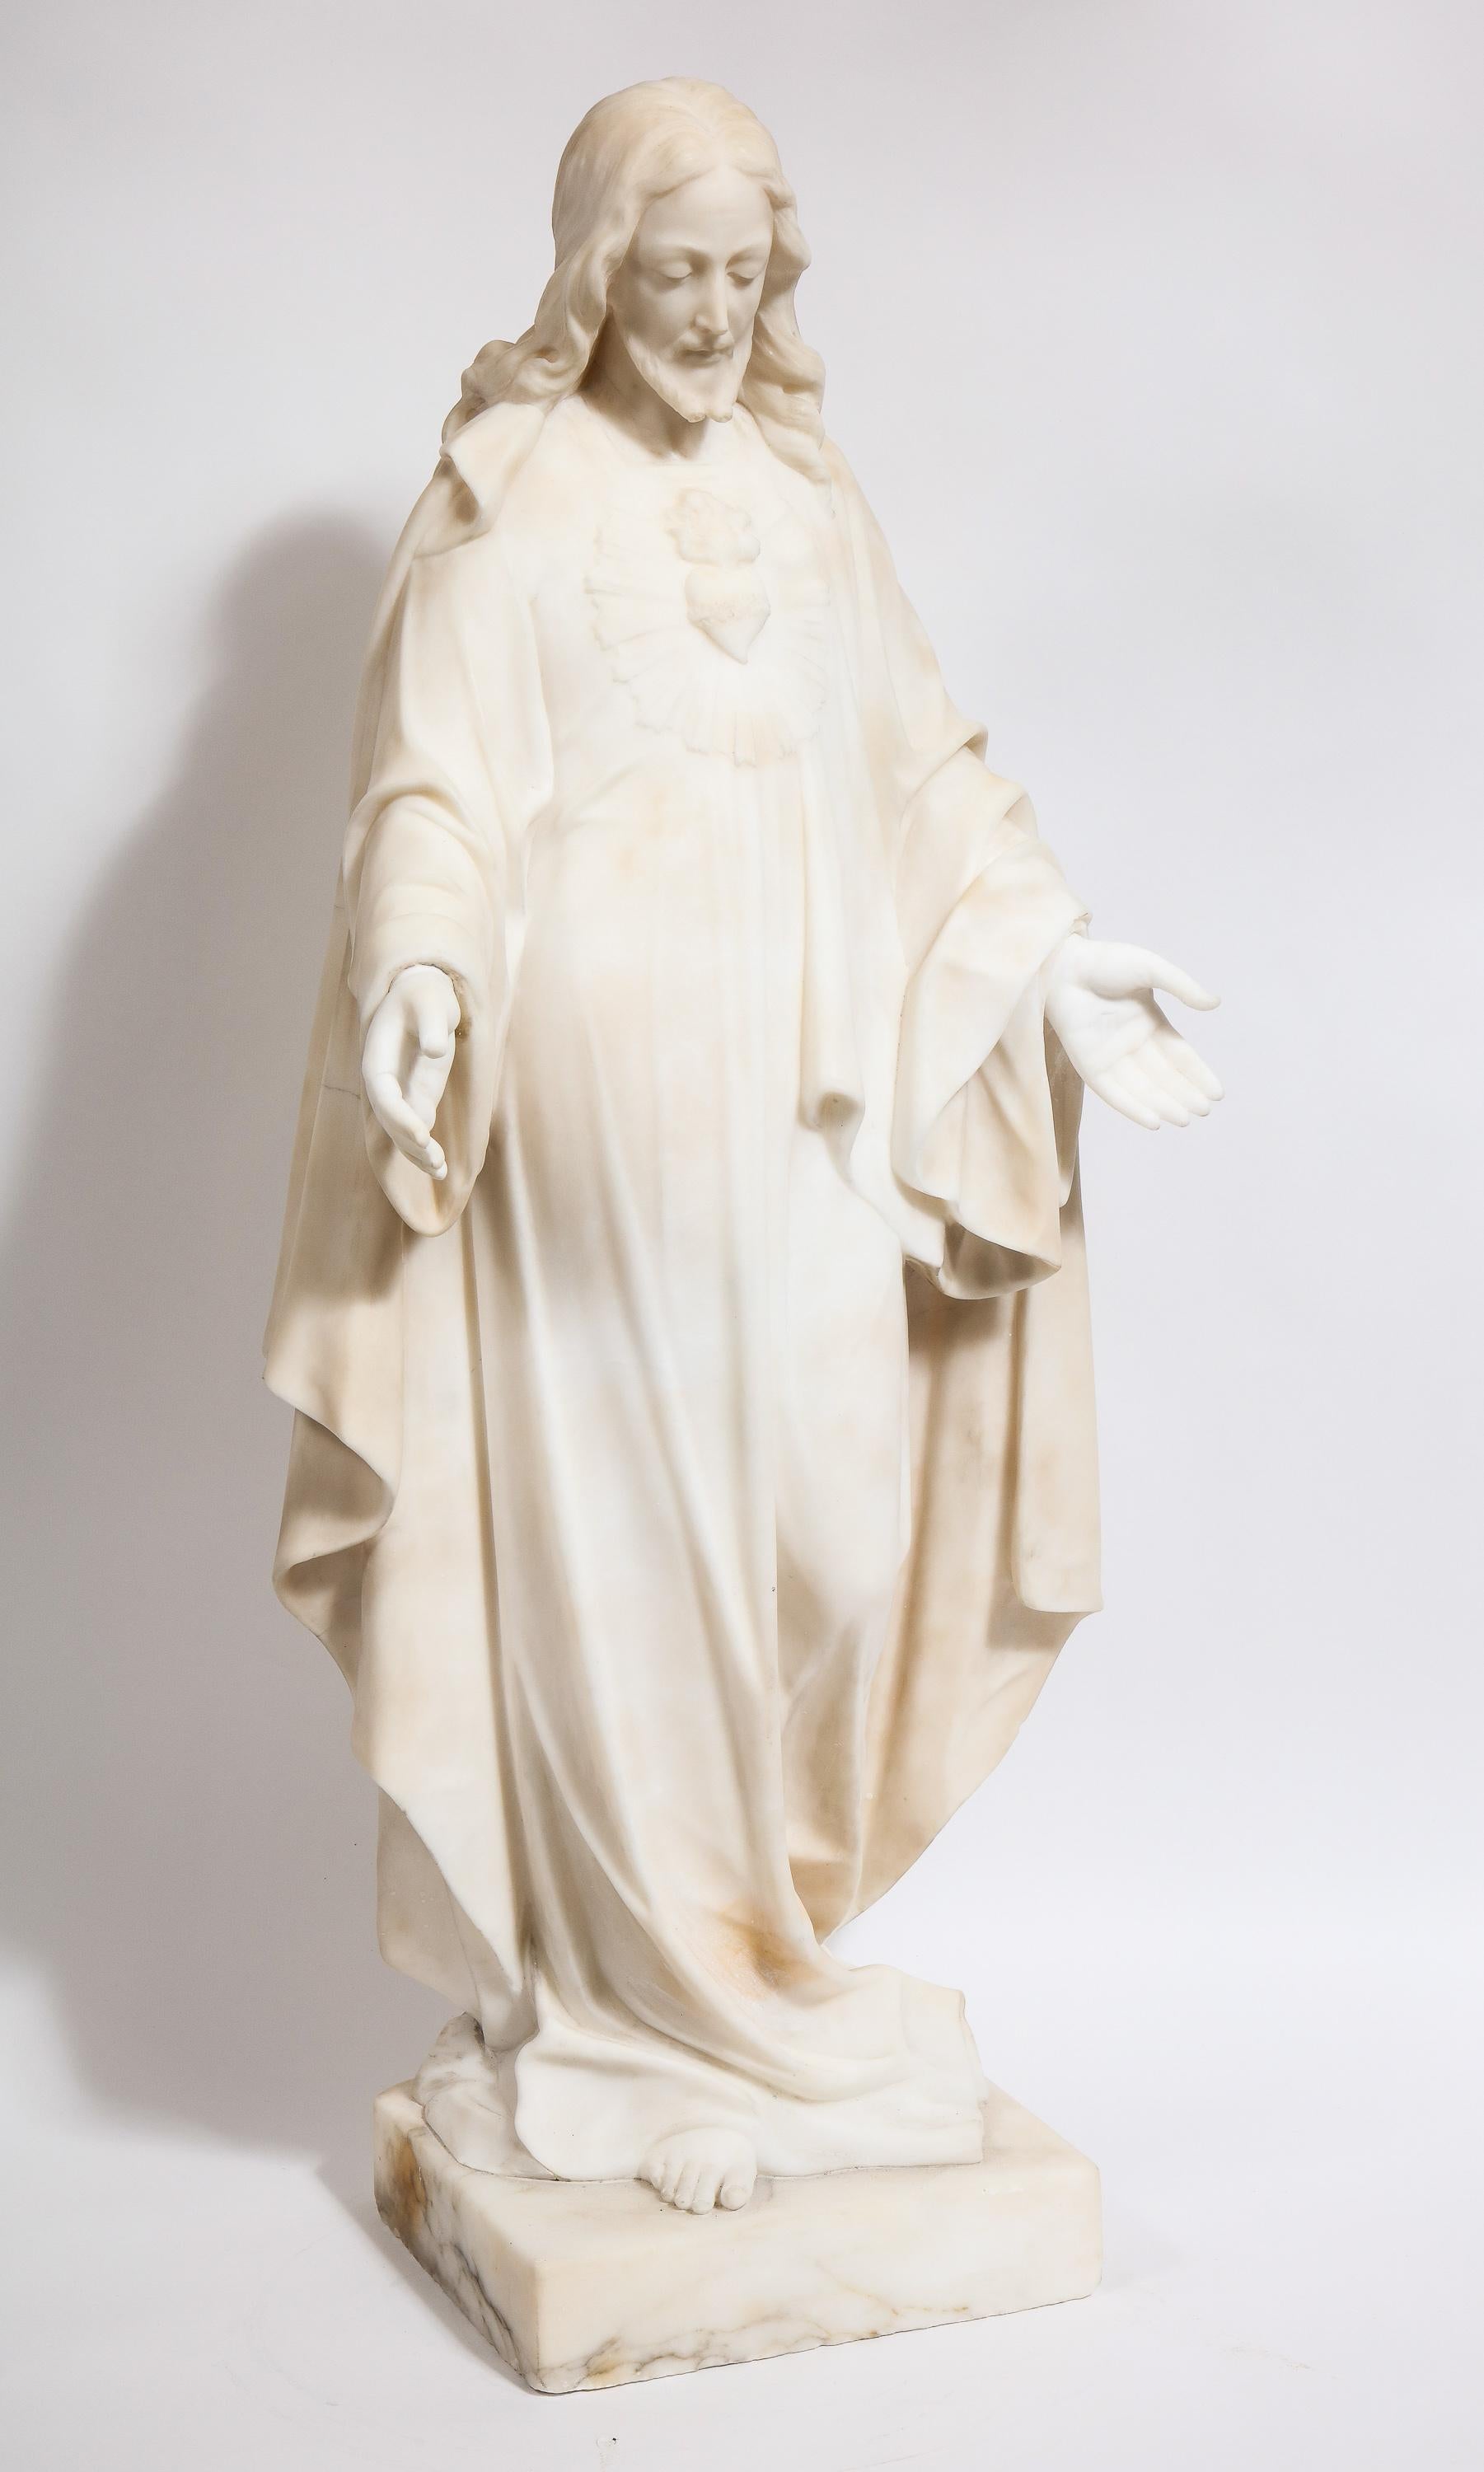 Museum quality Italian marble sculpture statue of Holy Jesus Christ, 19th century.

Exceptionally carved white-carrara marble sculpture depicting Jesus Christ standing with his palms open wearing his sacred heart. Rare marble from the 19th